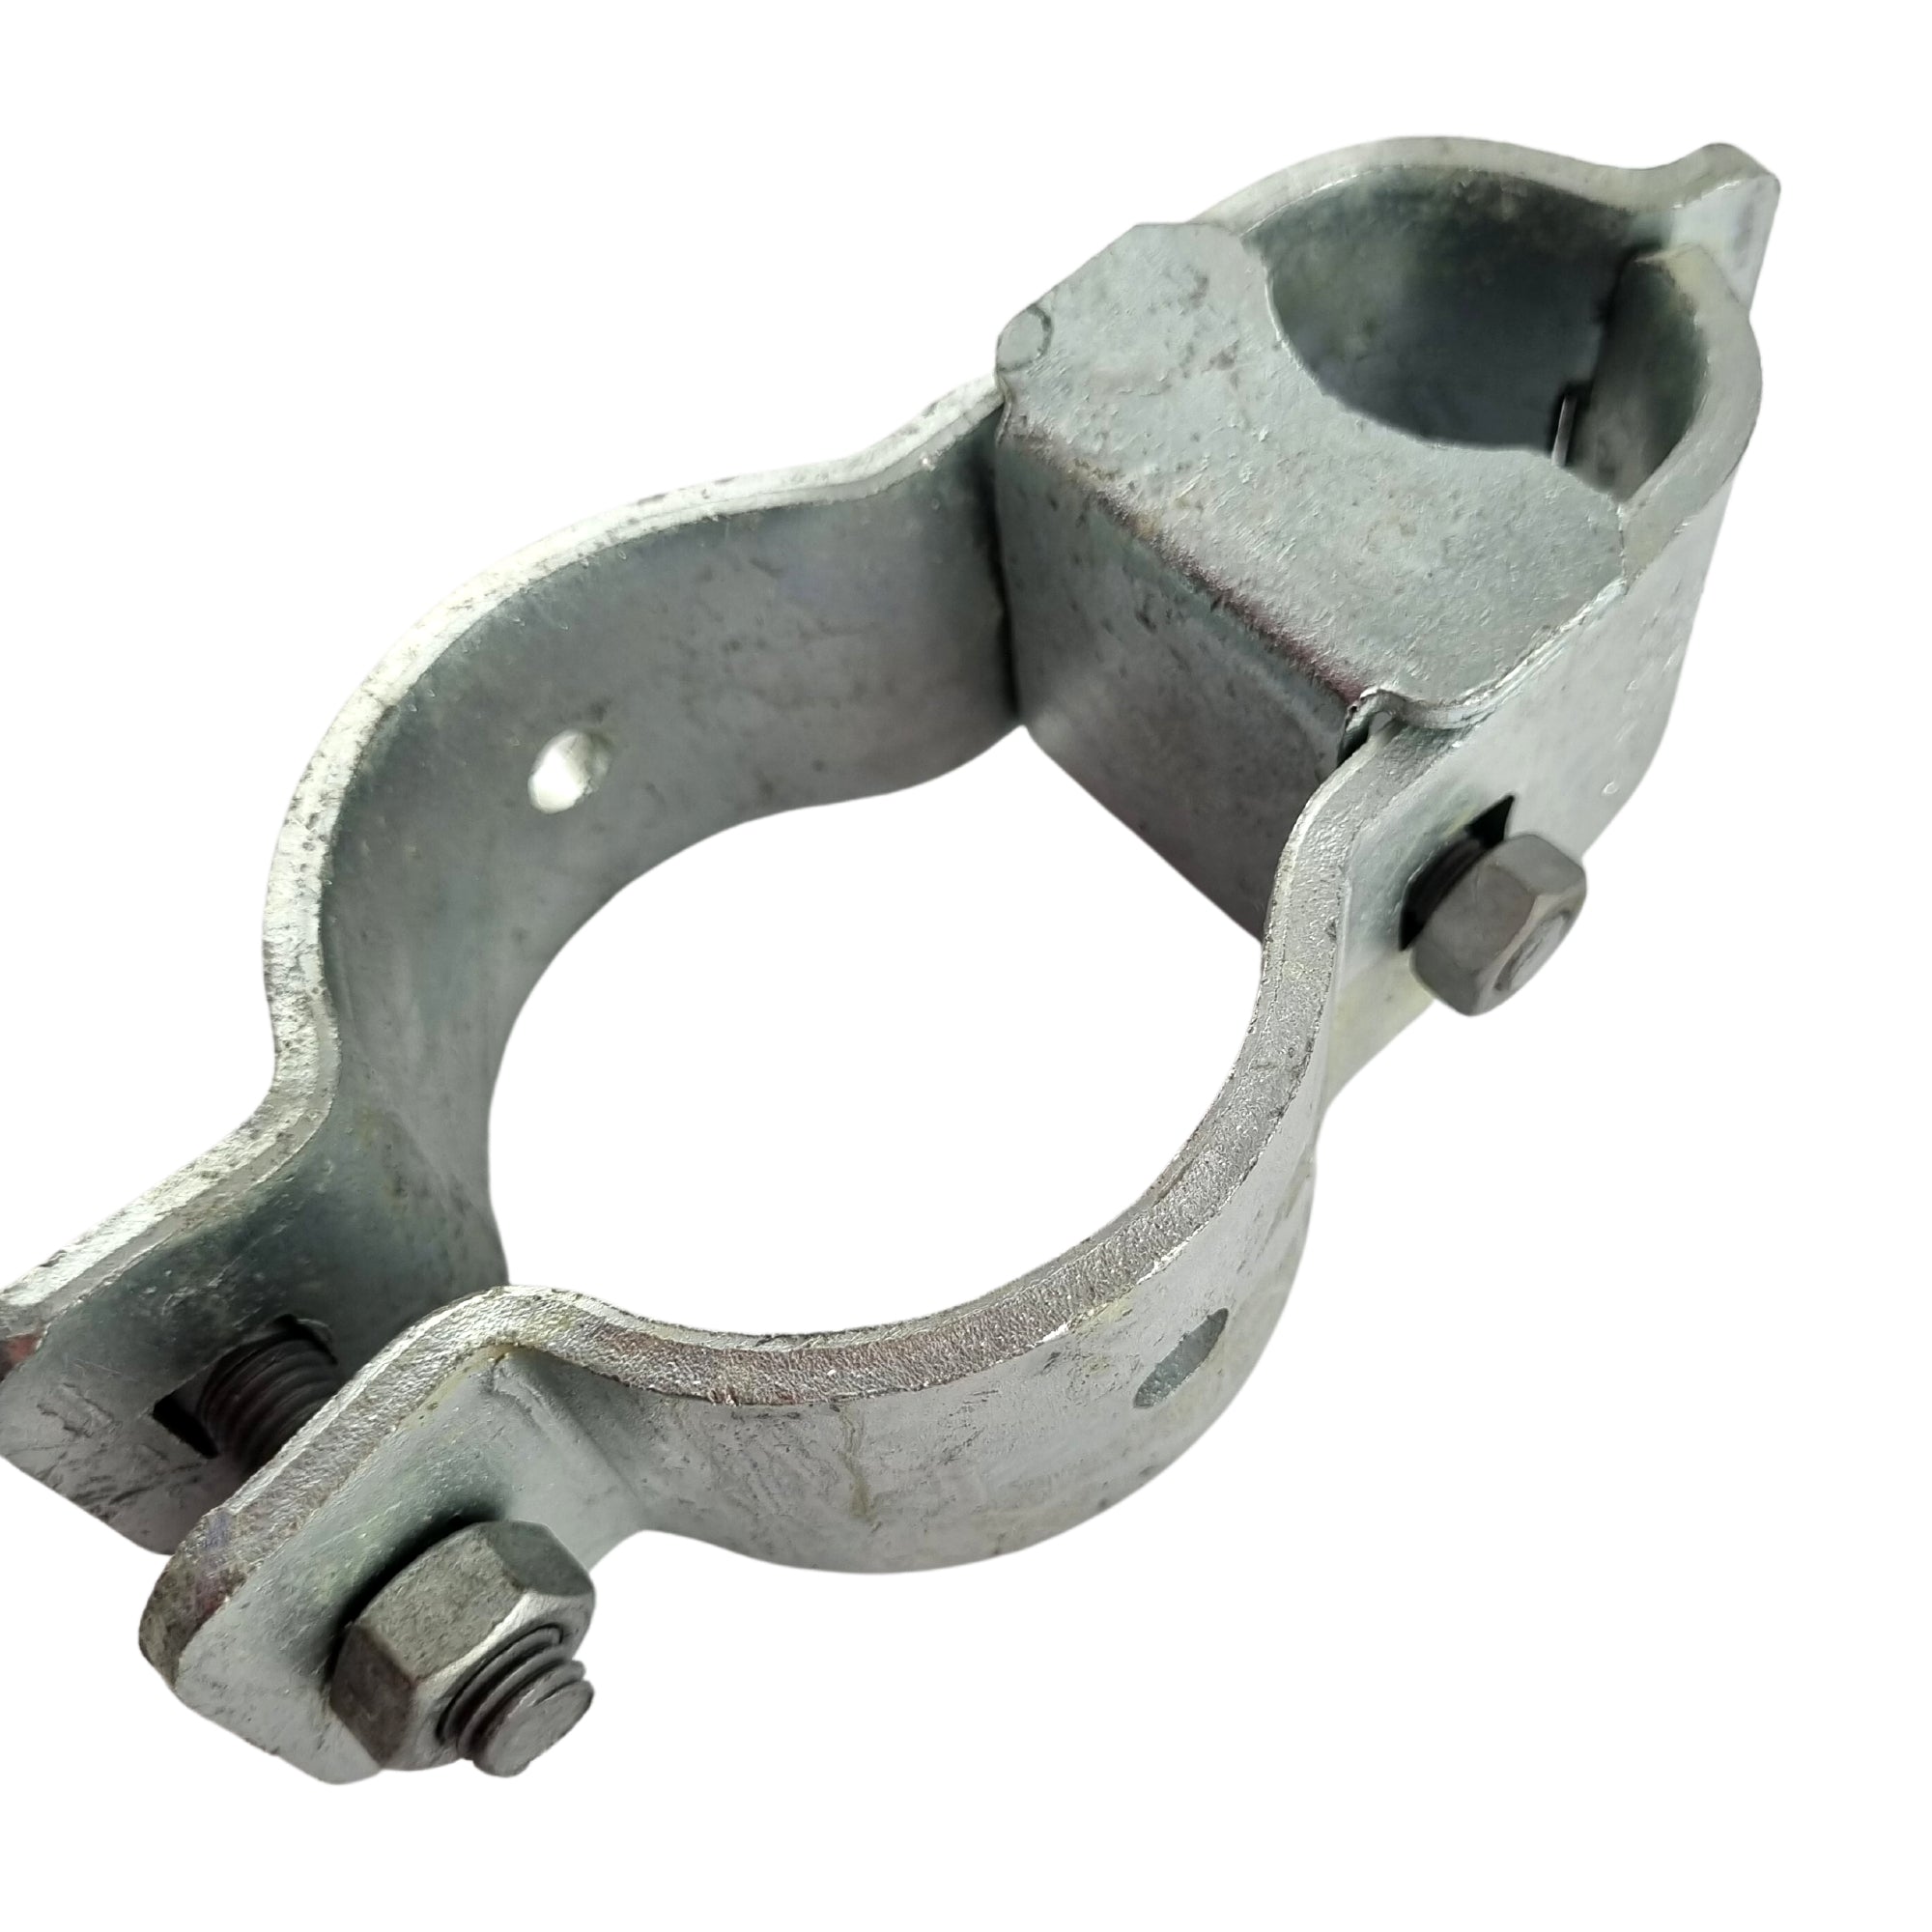 Two Part Interlocking Hinge + Attachment - Galvanised. Various sizes. Shop Fence & Gate Fittings online at chain.com.au. Shipping Australia wide.